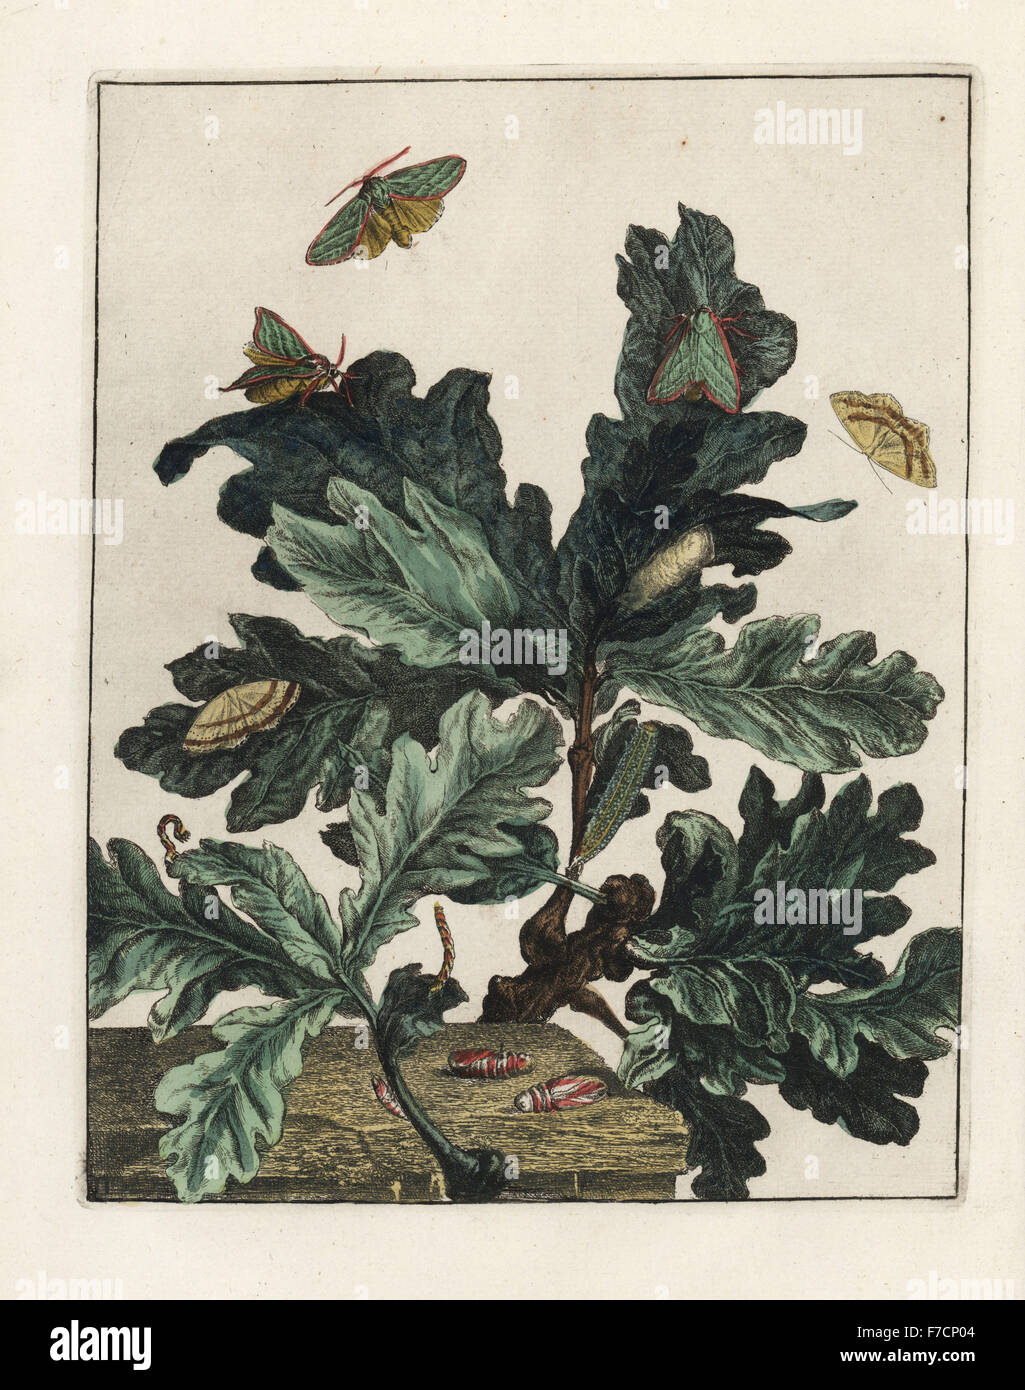 Green silver-lines, Pseudoips prasinana, and mocha moth, Cyclophora annularia, feeding on maple leaves, Acer campestris. Handcoloured copperplate engraving drawn and etched by Jacob l'Admiral in Naauwkeurige Waarneemingen omtrent de veranderingen van veele Insekten (Accurate Descriptions of the Metamorphoses of Insects), J. Sluyter, Amsterdam, 1774. For this second edition, M. Houttuyn added another eight plates to the original 25. Stock Photo